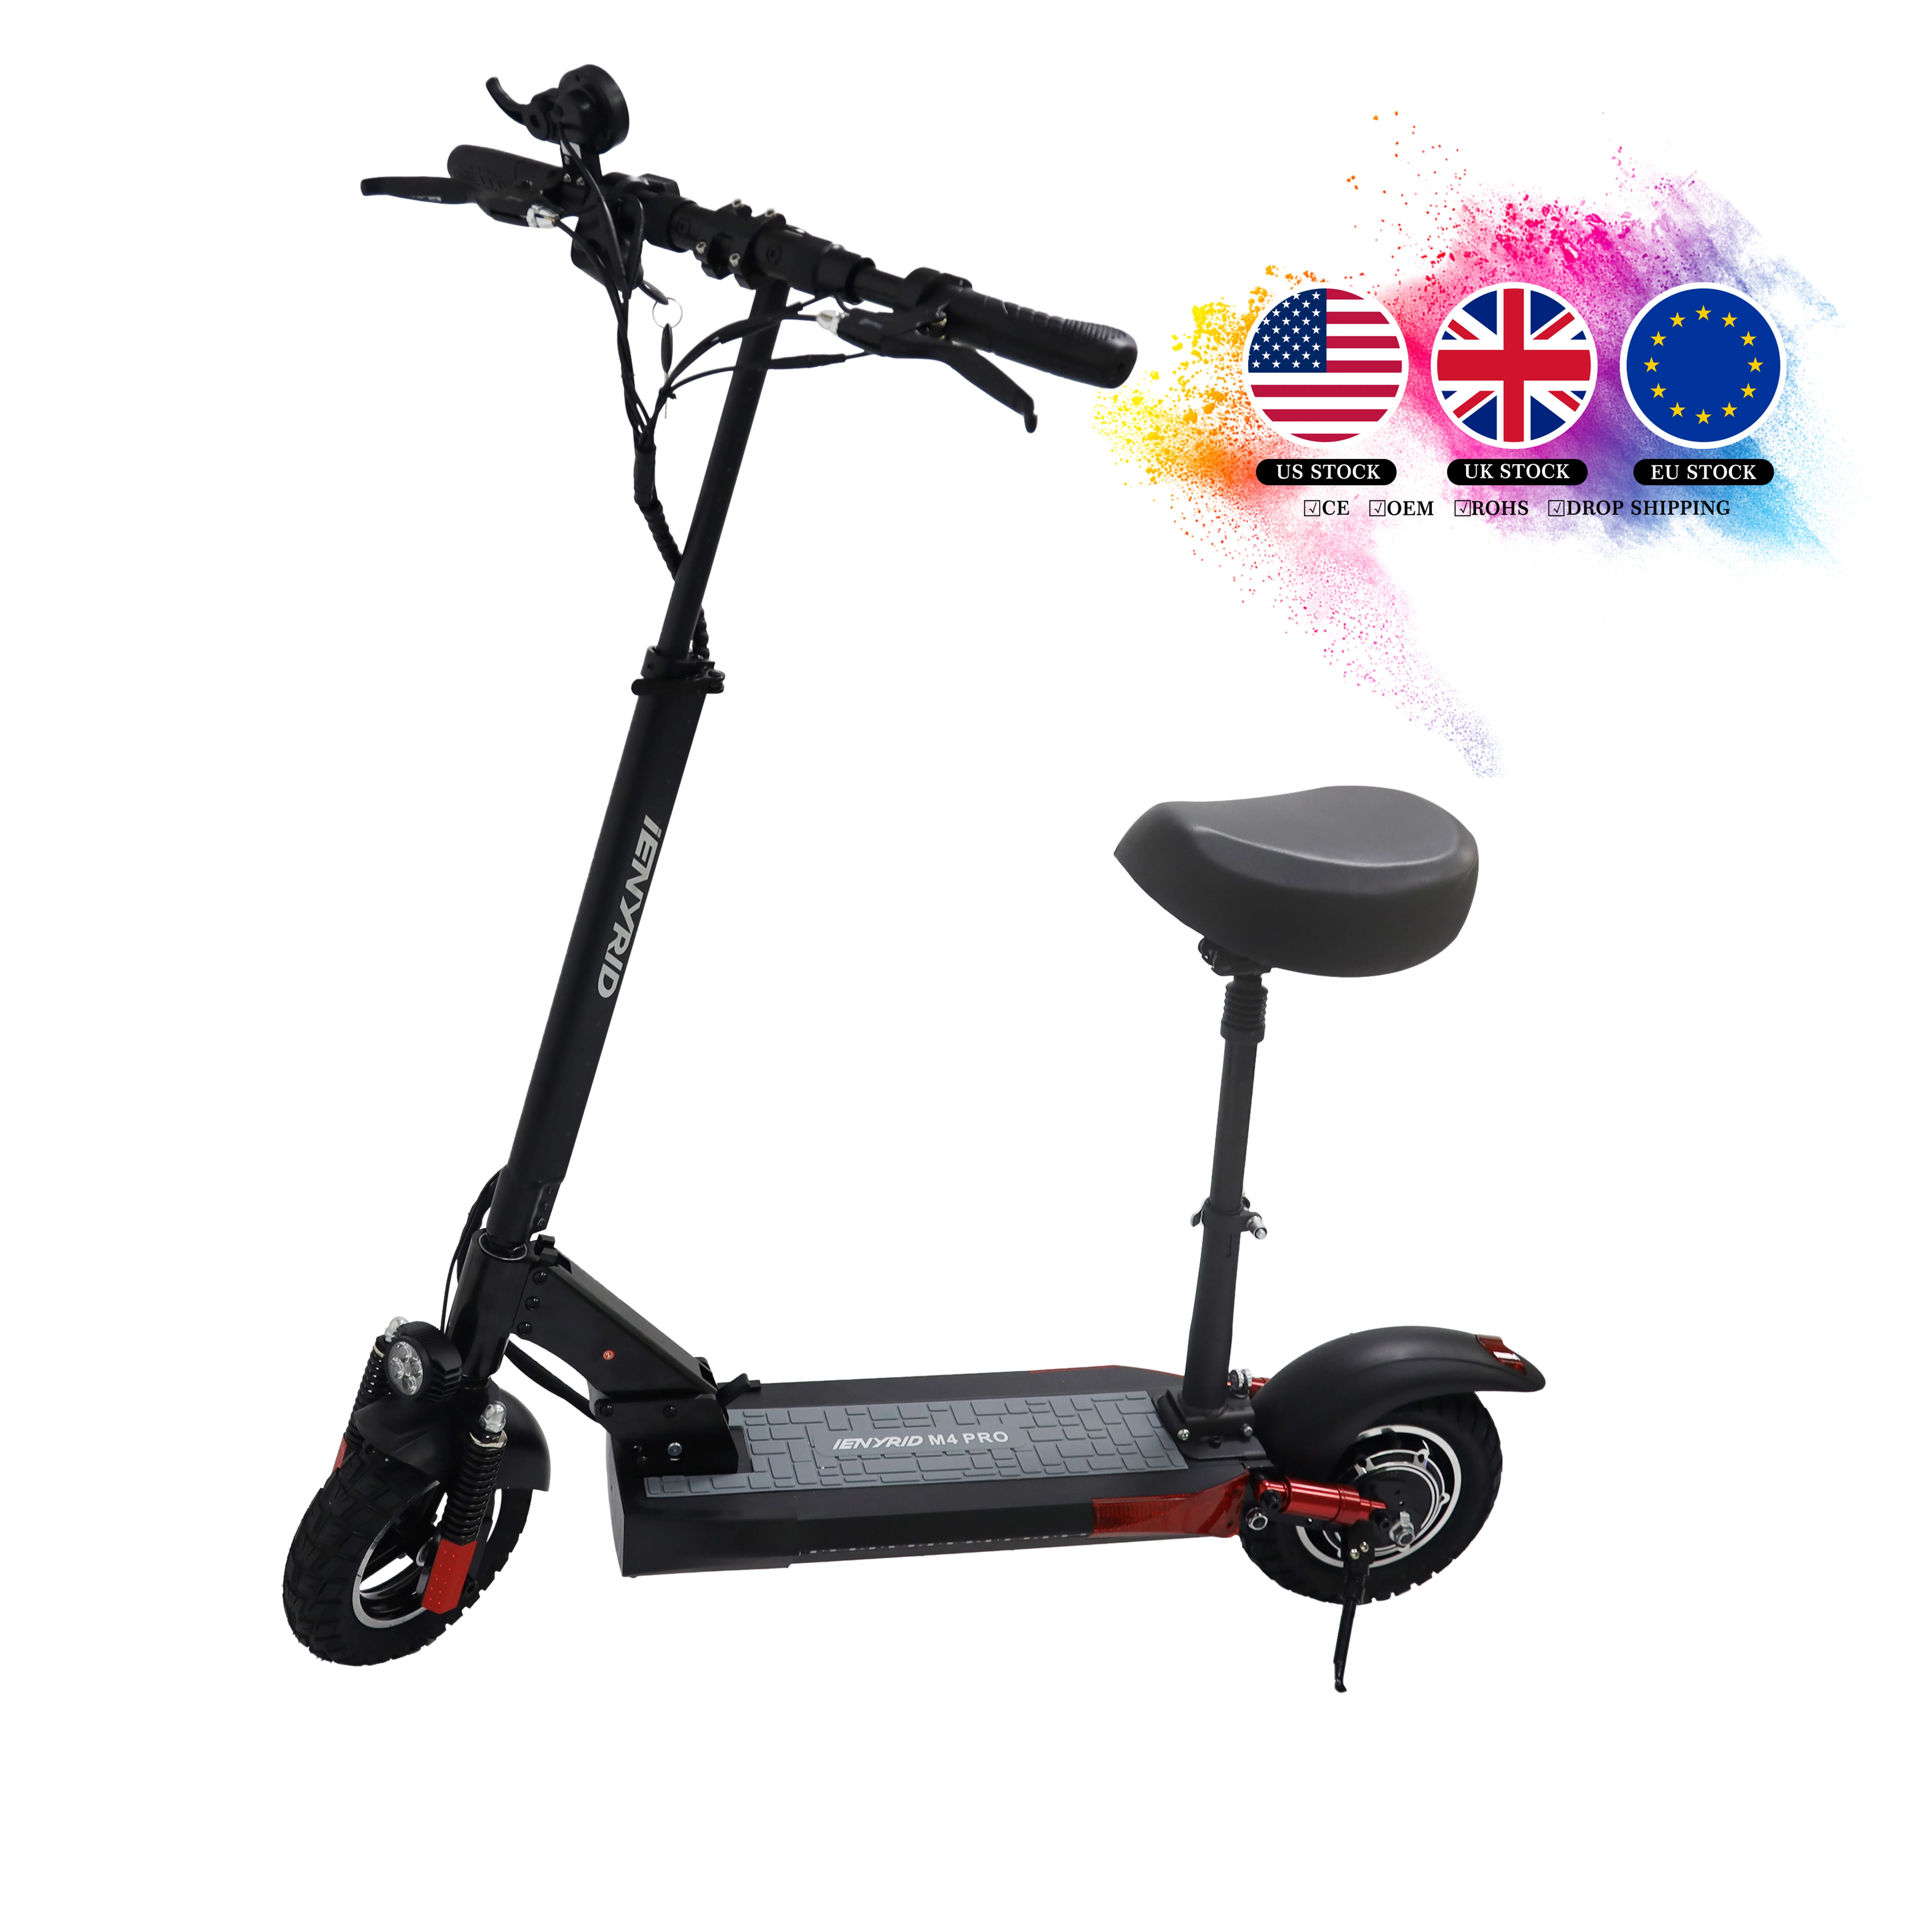 Foldable Adults Electric Scooter iENYRID M4 PRO 500W Max Speed 45km/h in US EU UK Warehouse, Black+red